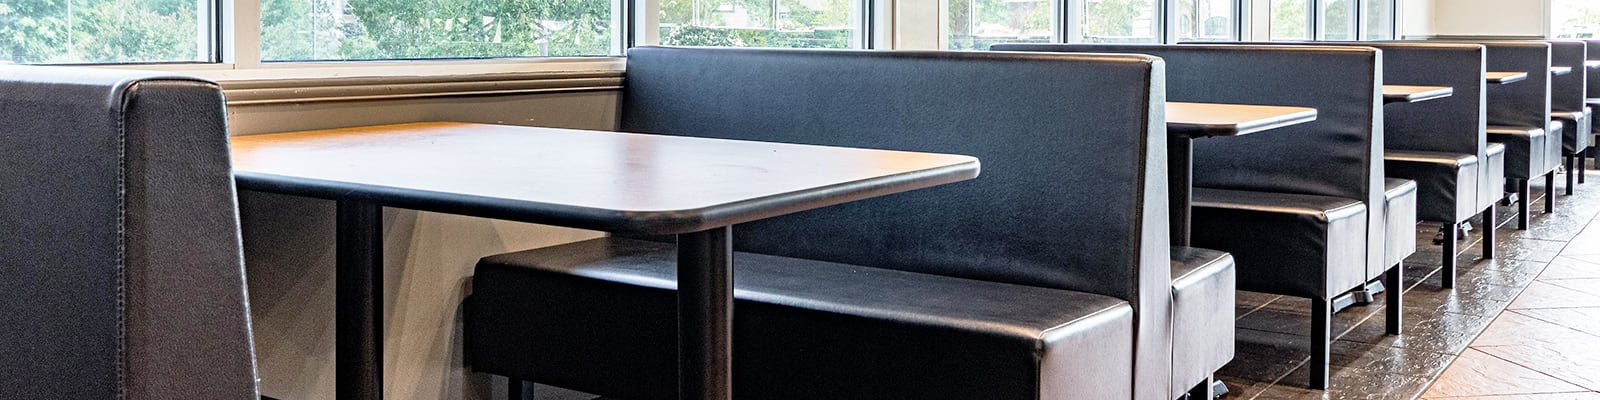 why are restaurant booths the best seating option?